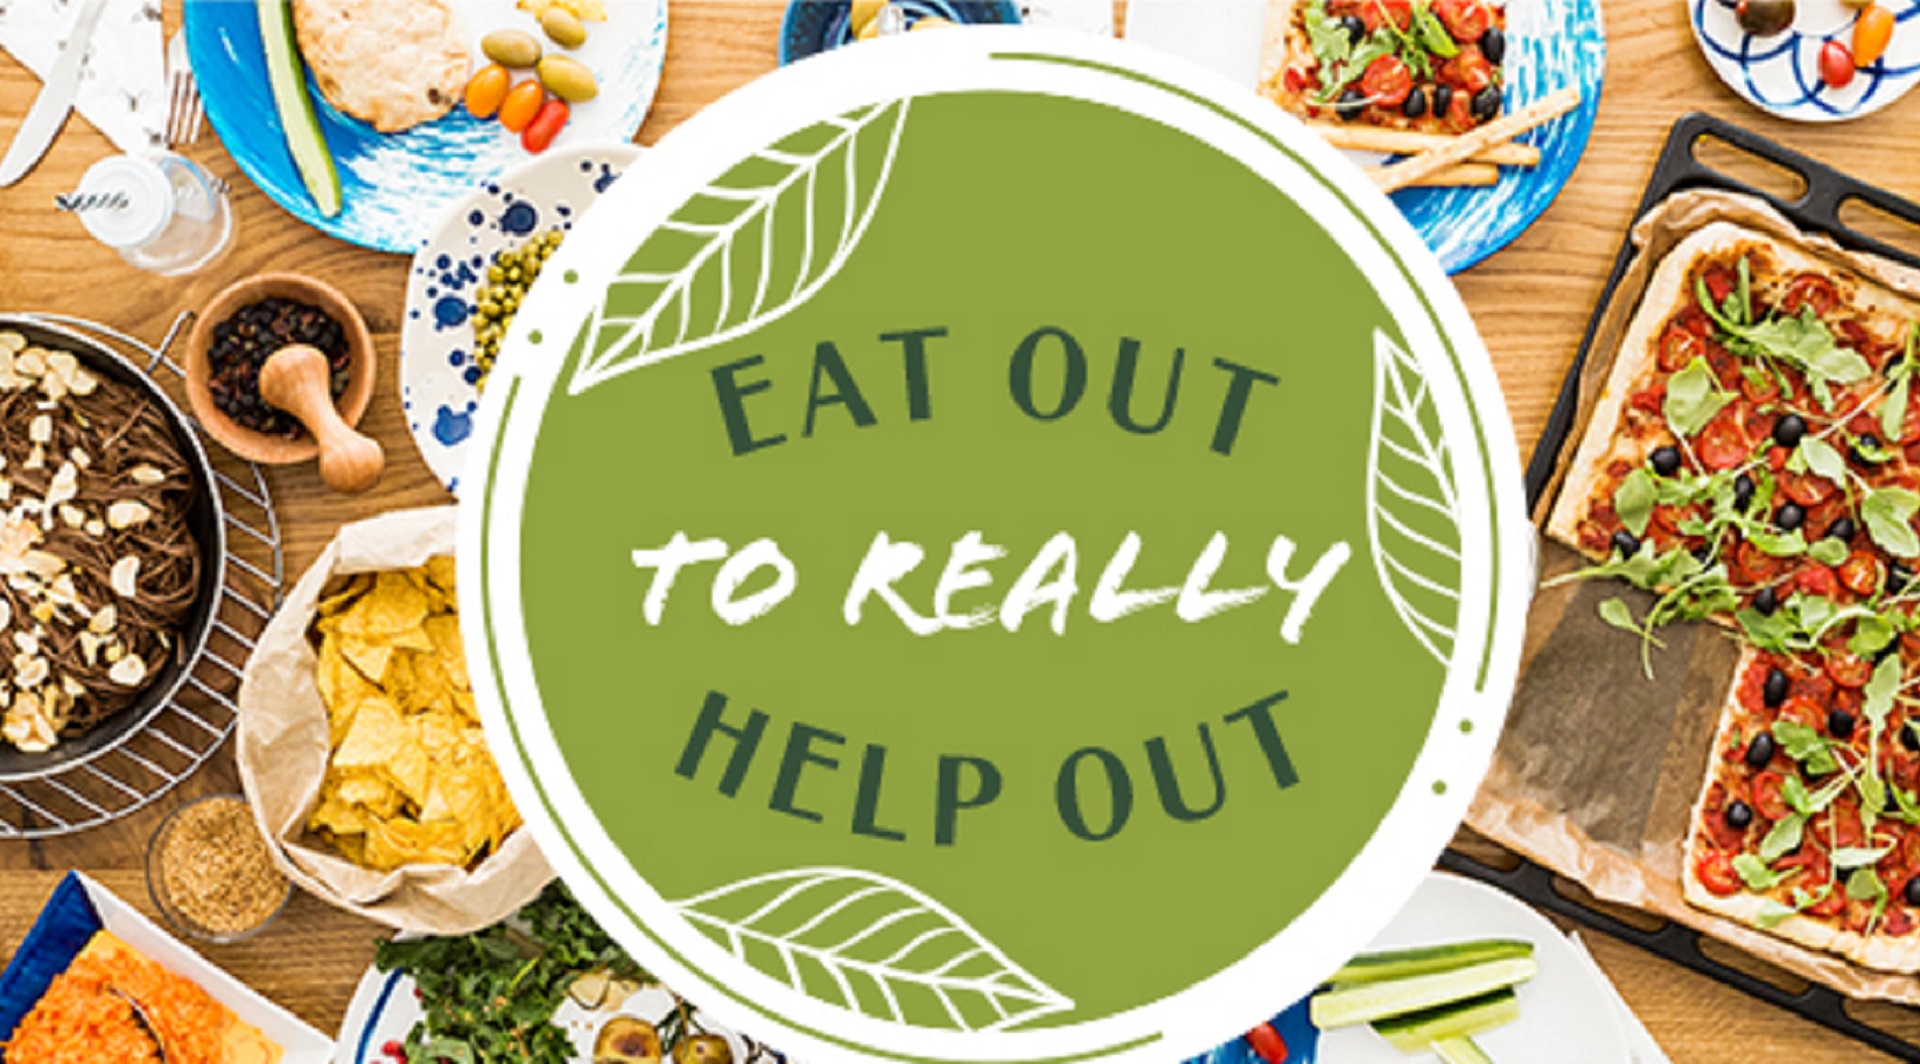 Eat Out To Really Help Out credit Poppy Design Studio https://poppydesignstudio.com